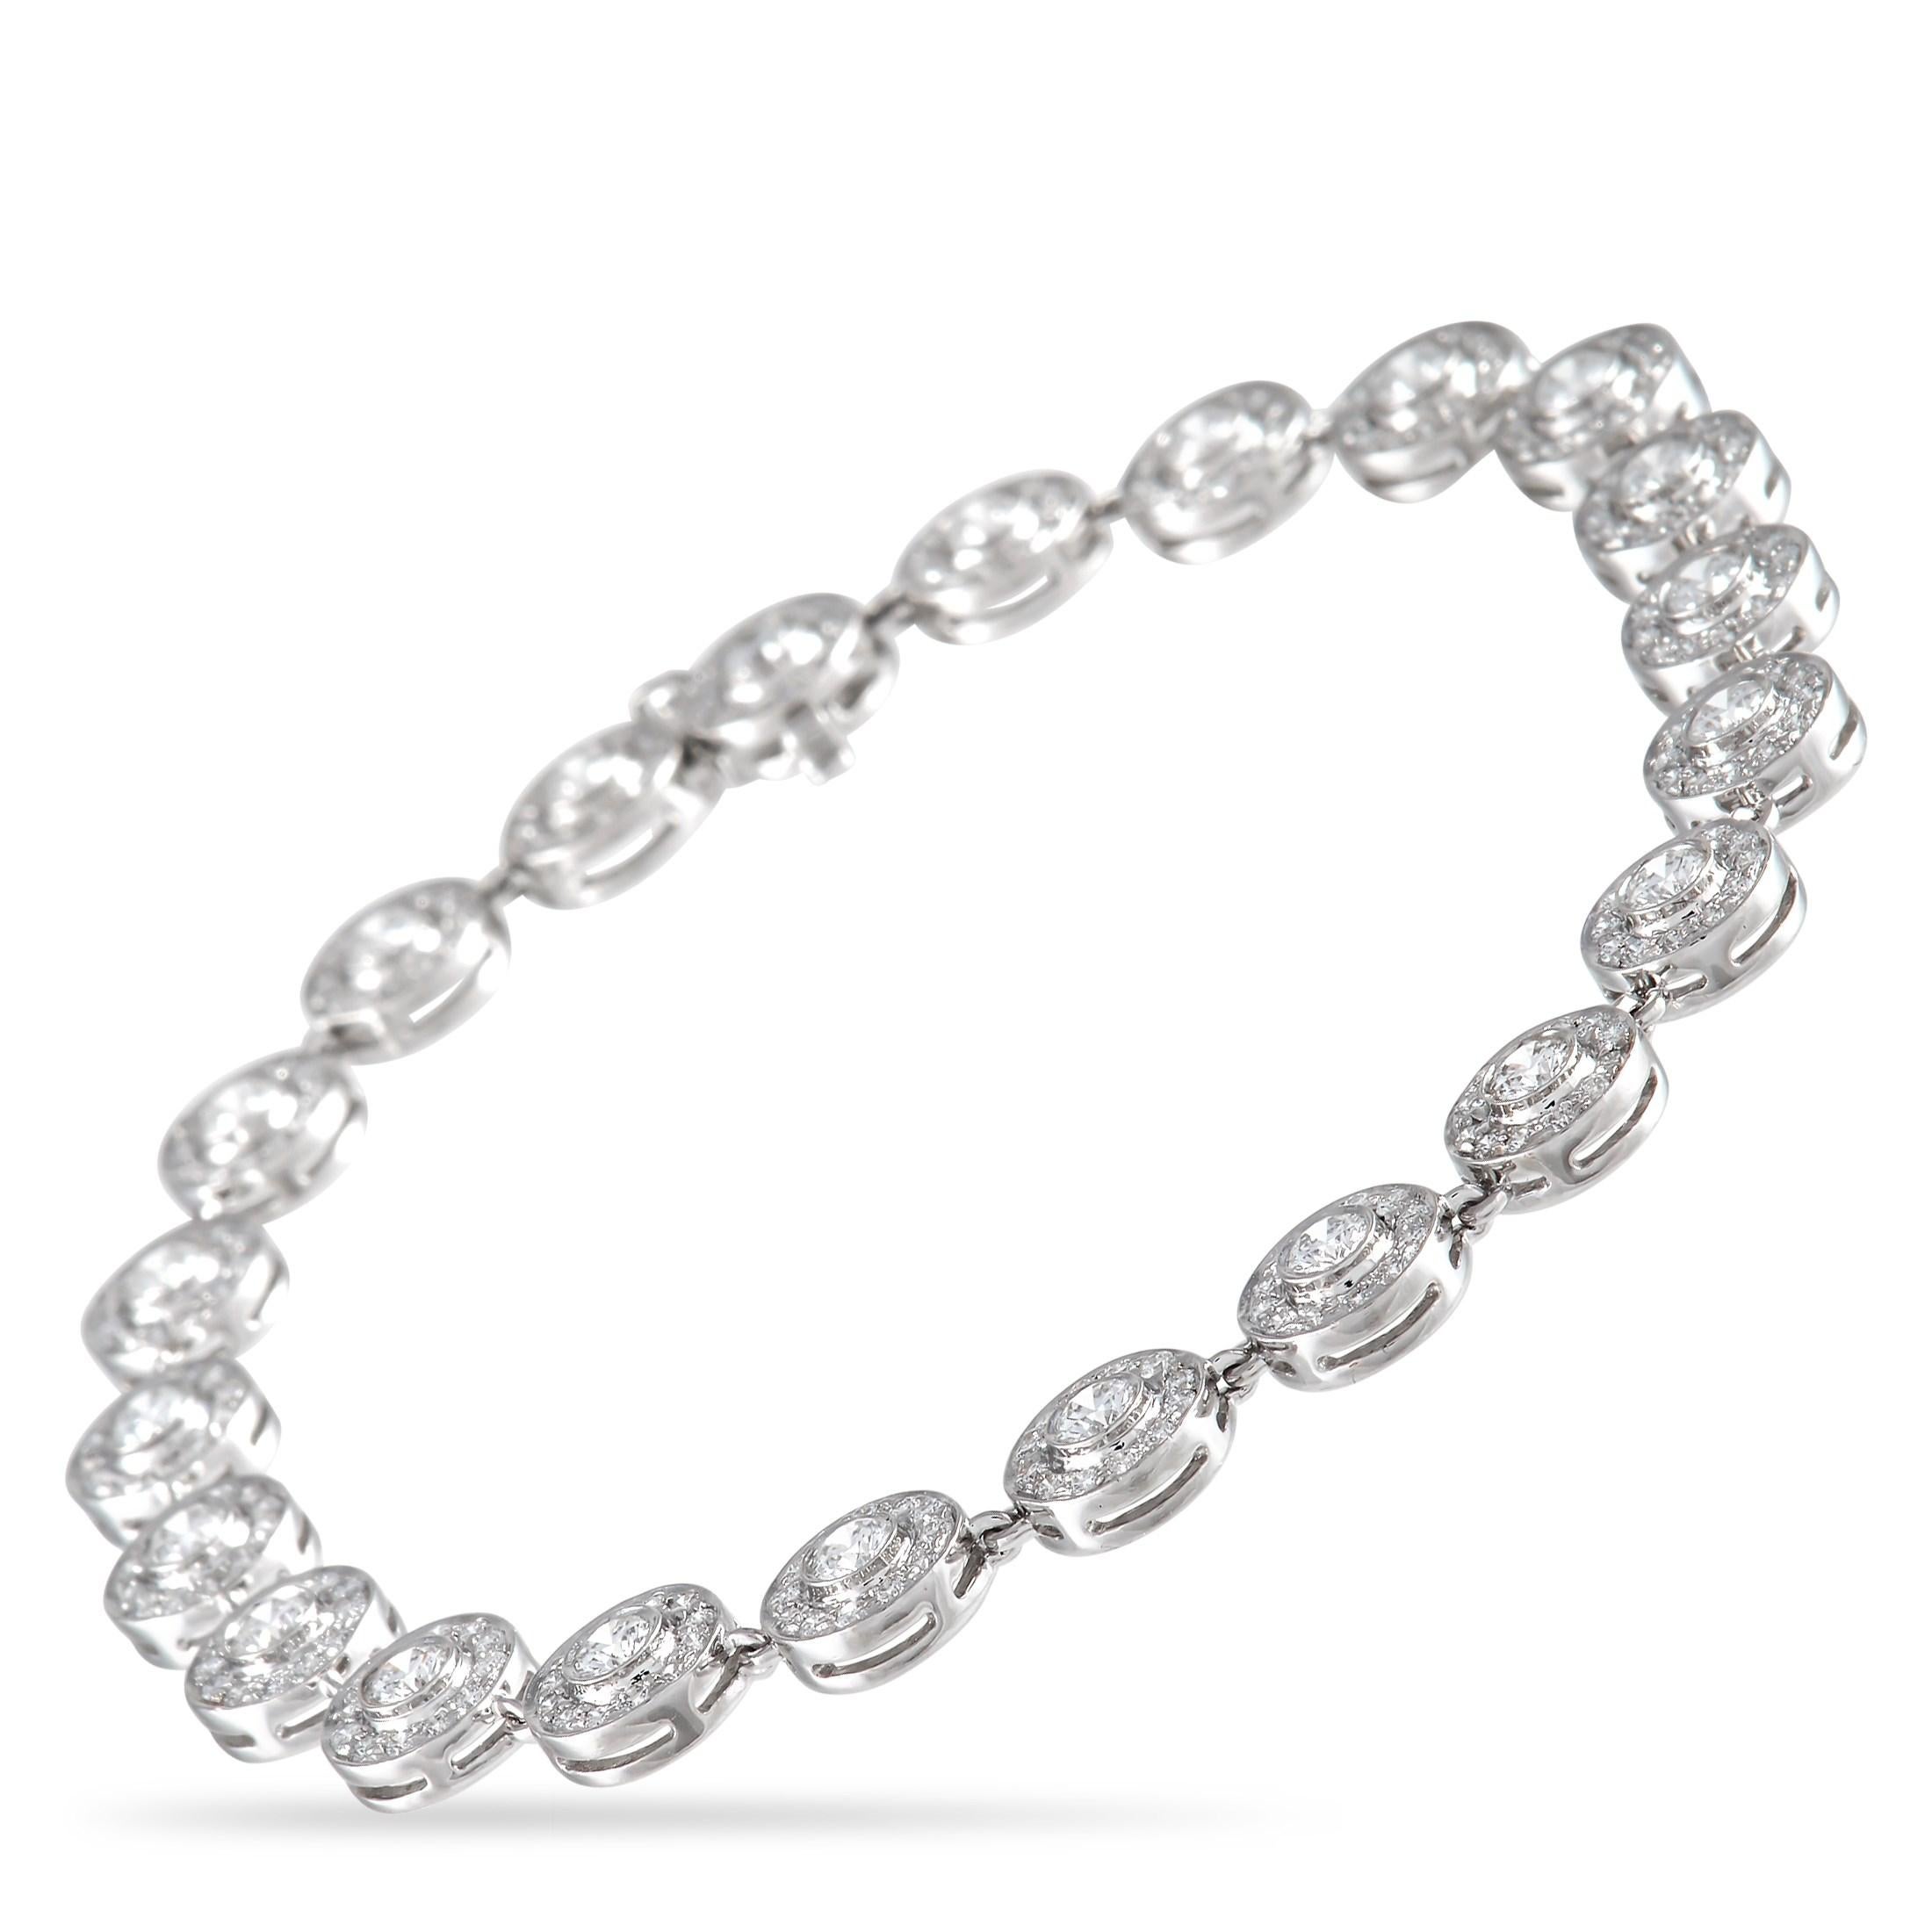 Add a touch of classic romance to your looks with this Tiffany & Co. Platinum 2.57 ct Diamond Circlet Bracelet. The 7-inch bracelet features a line of 22 platinum circles, each set with a single brilliant-cut diamond in the center and haloed by